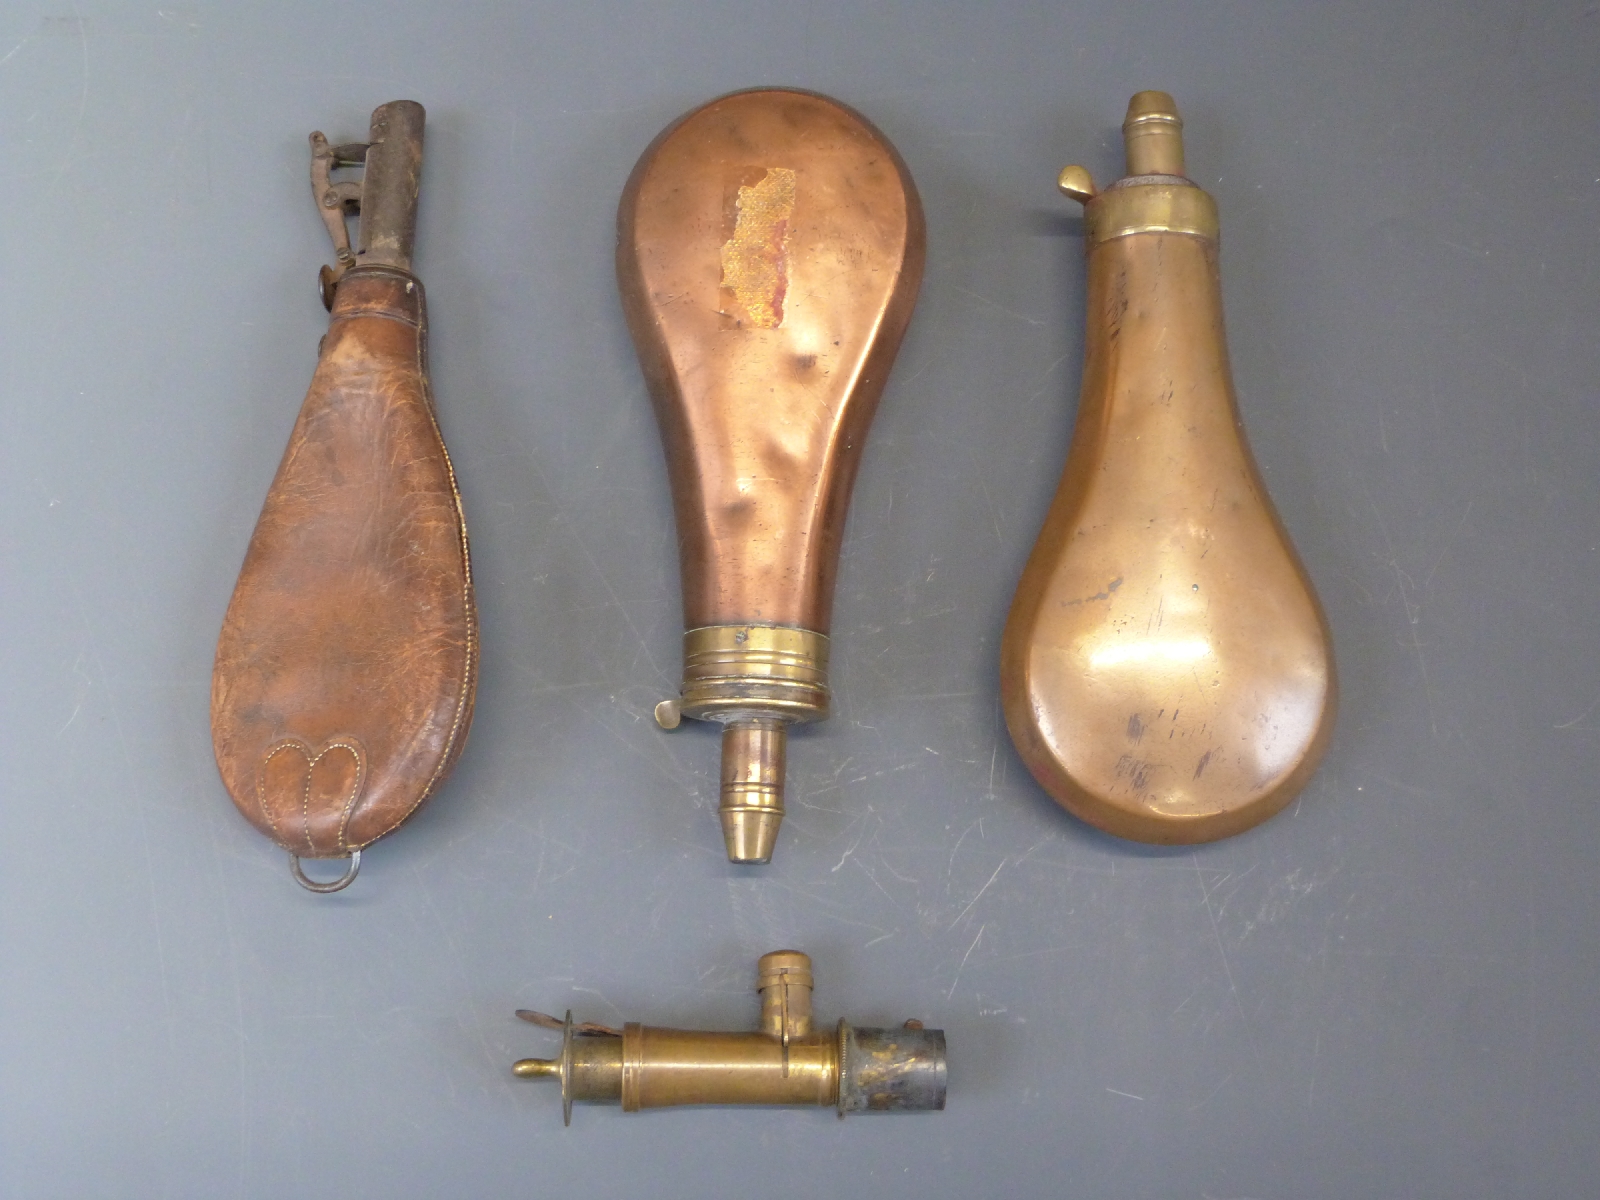 Two copper and brass powder flasks one Dixon & Sons (19.5cm long) the other Sykes (20cm long)